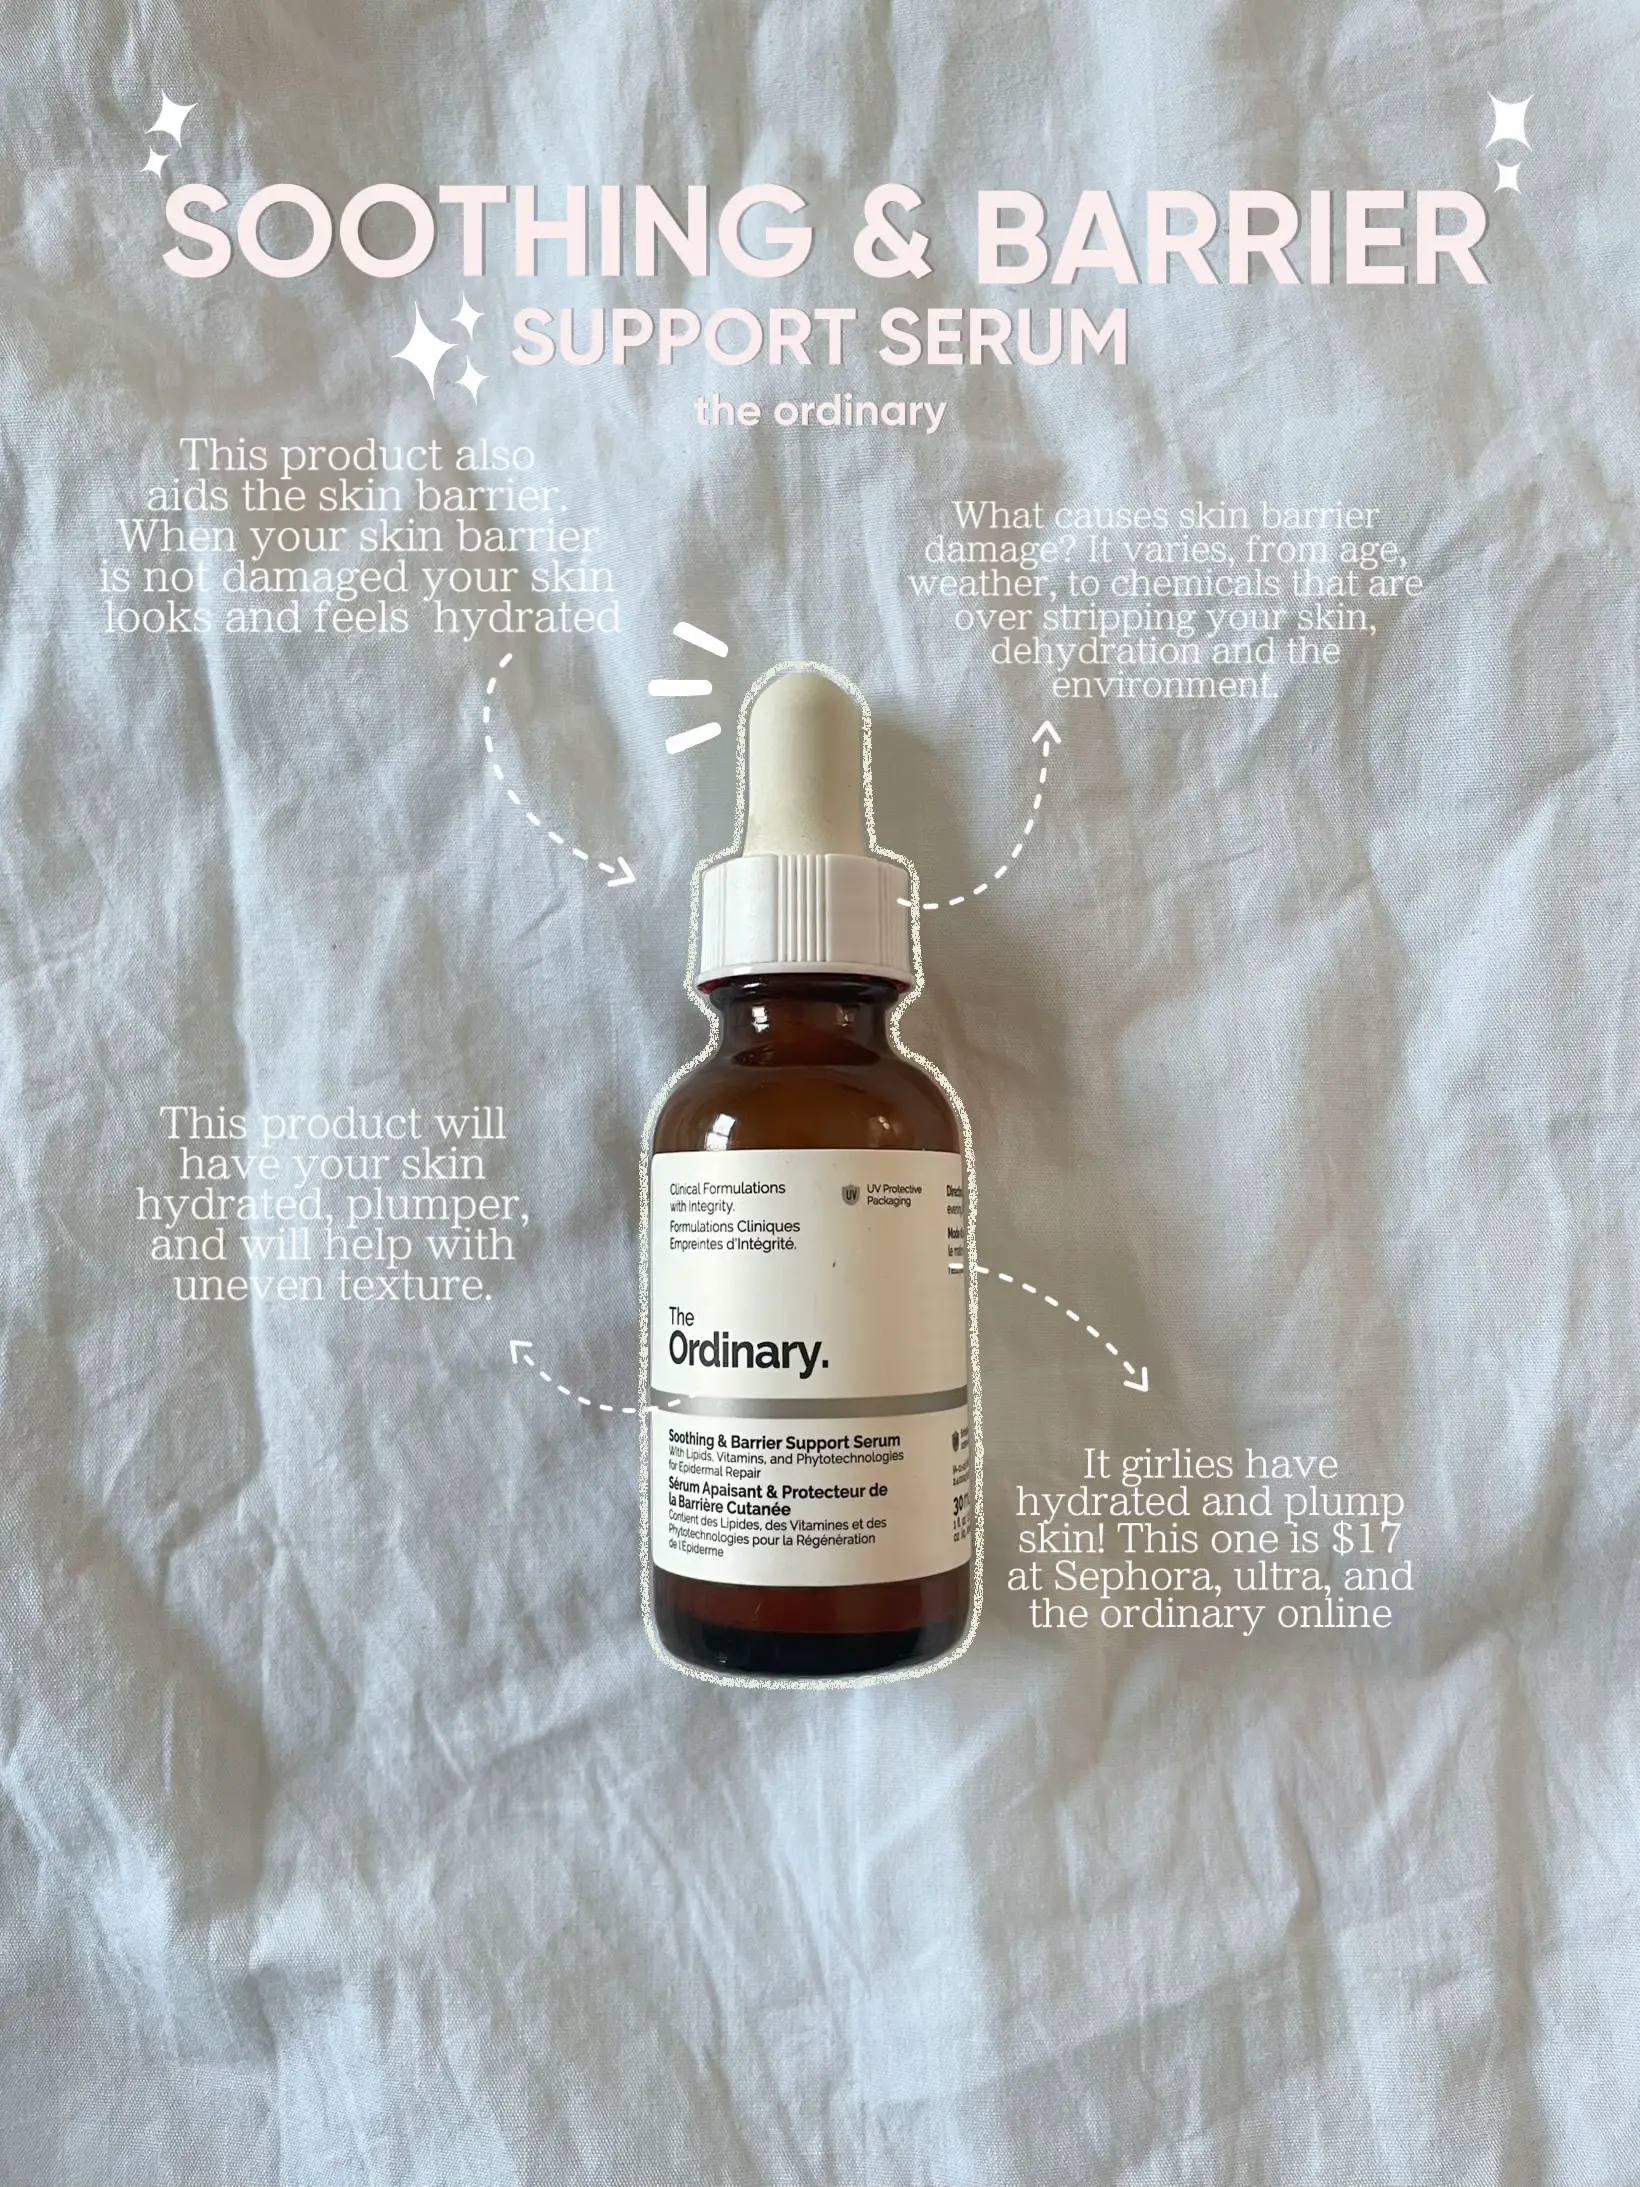 The Ordinary - Soothing & Barrier Support Serum Sérum Reparador